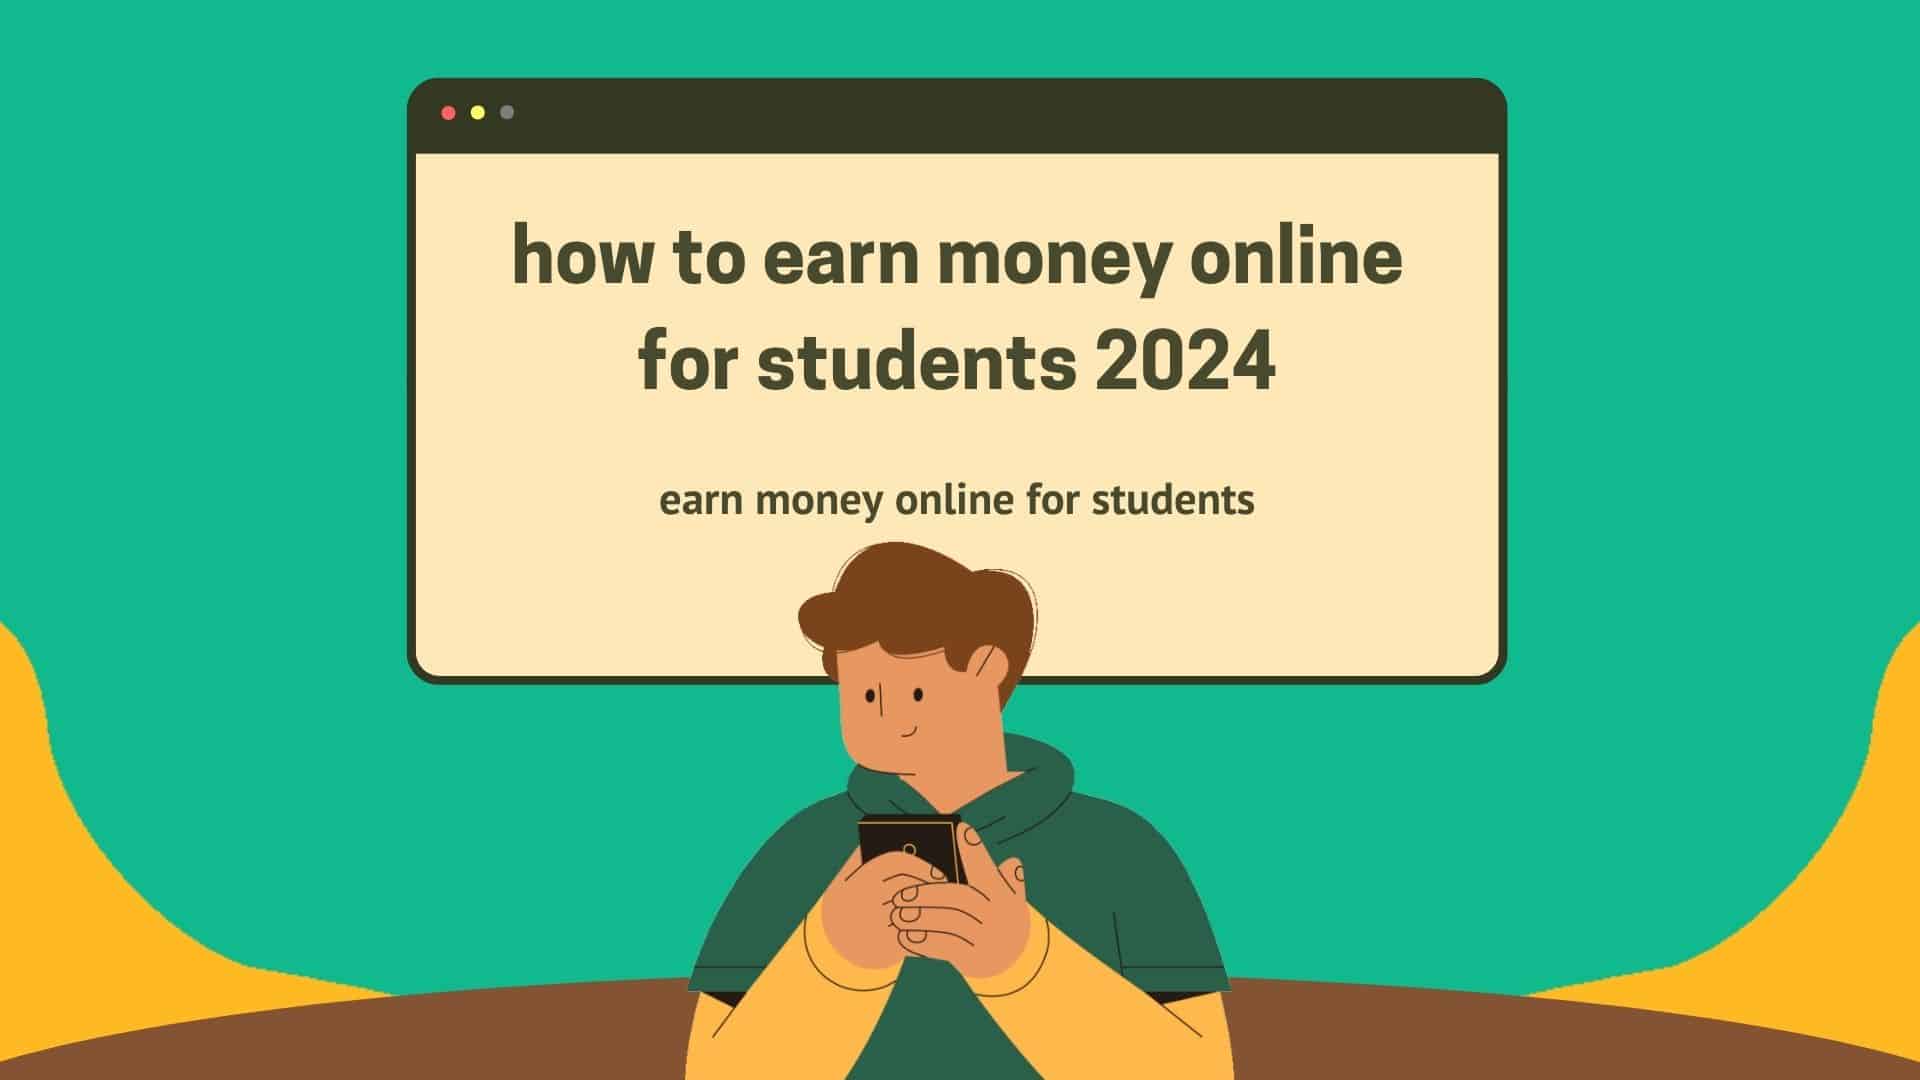 How to earn money online for students 2024